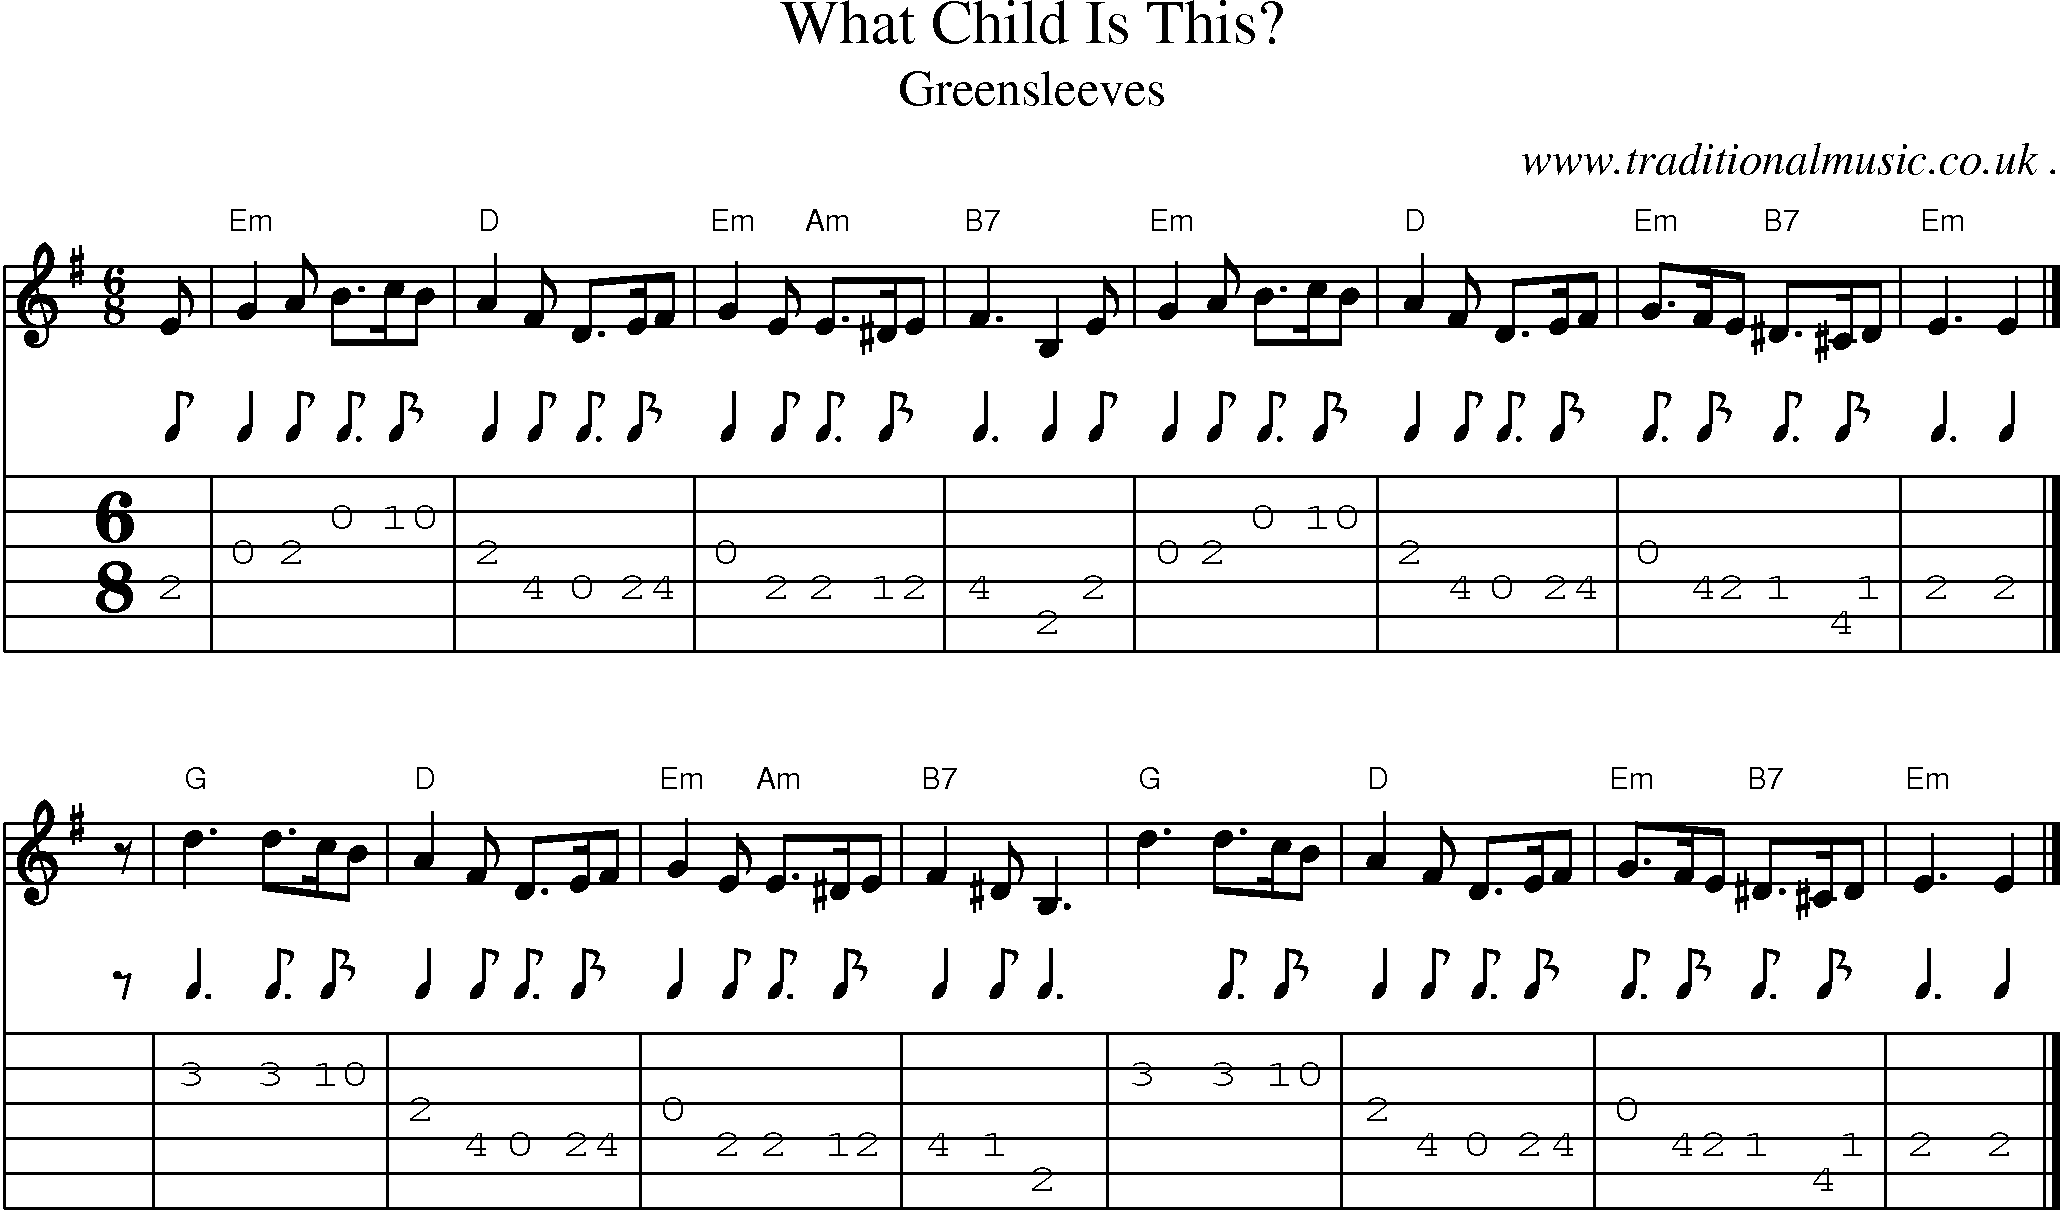 Sheet-music  score, Chords and Guitar Tabs for What Child Is This